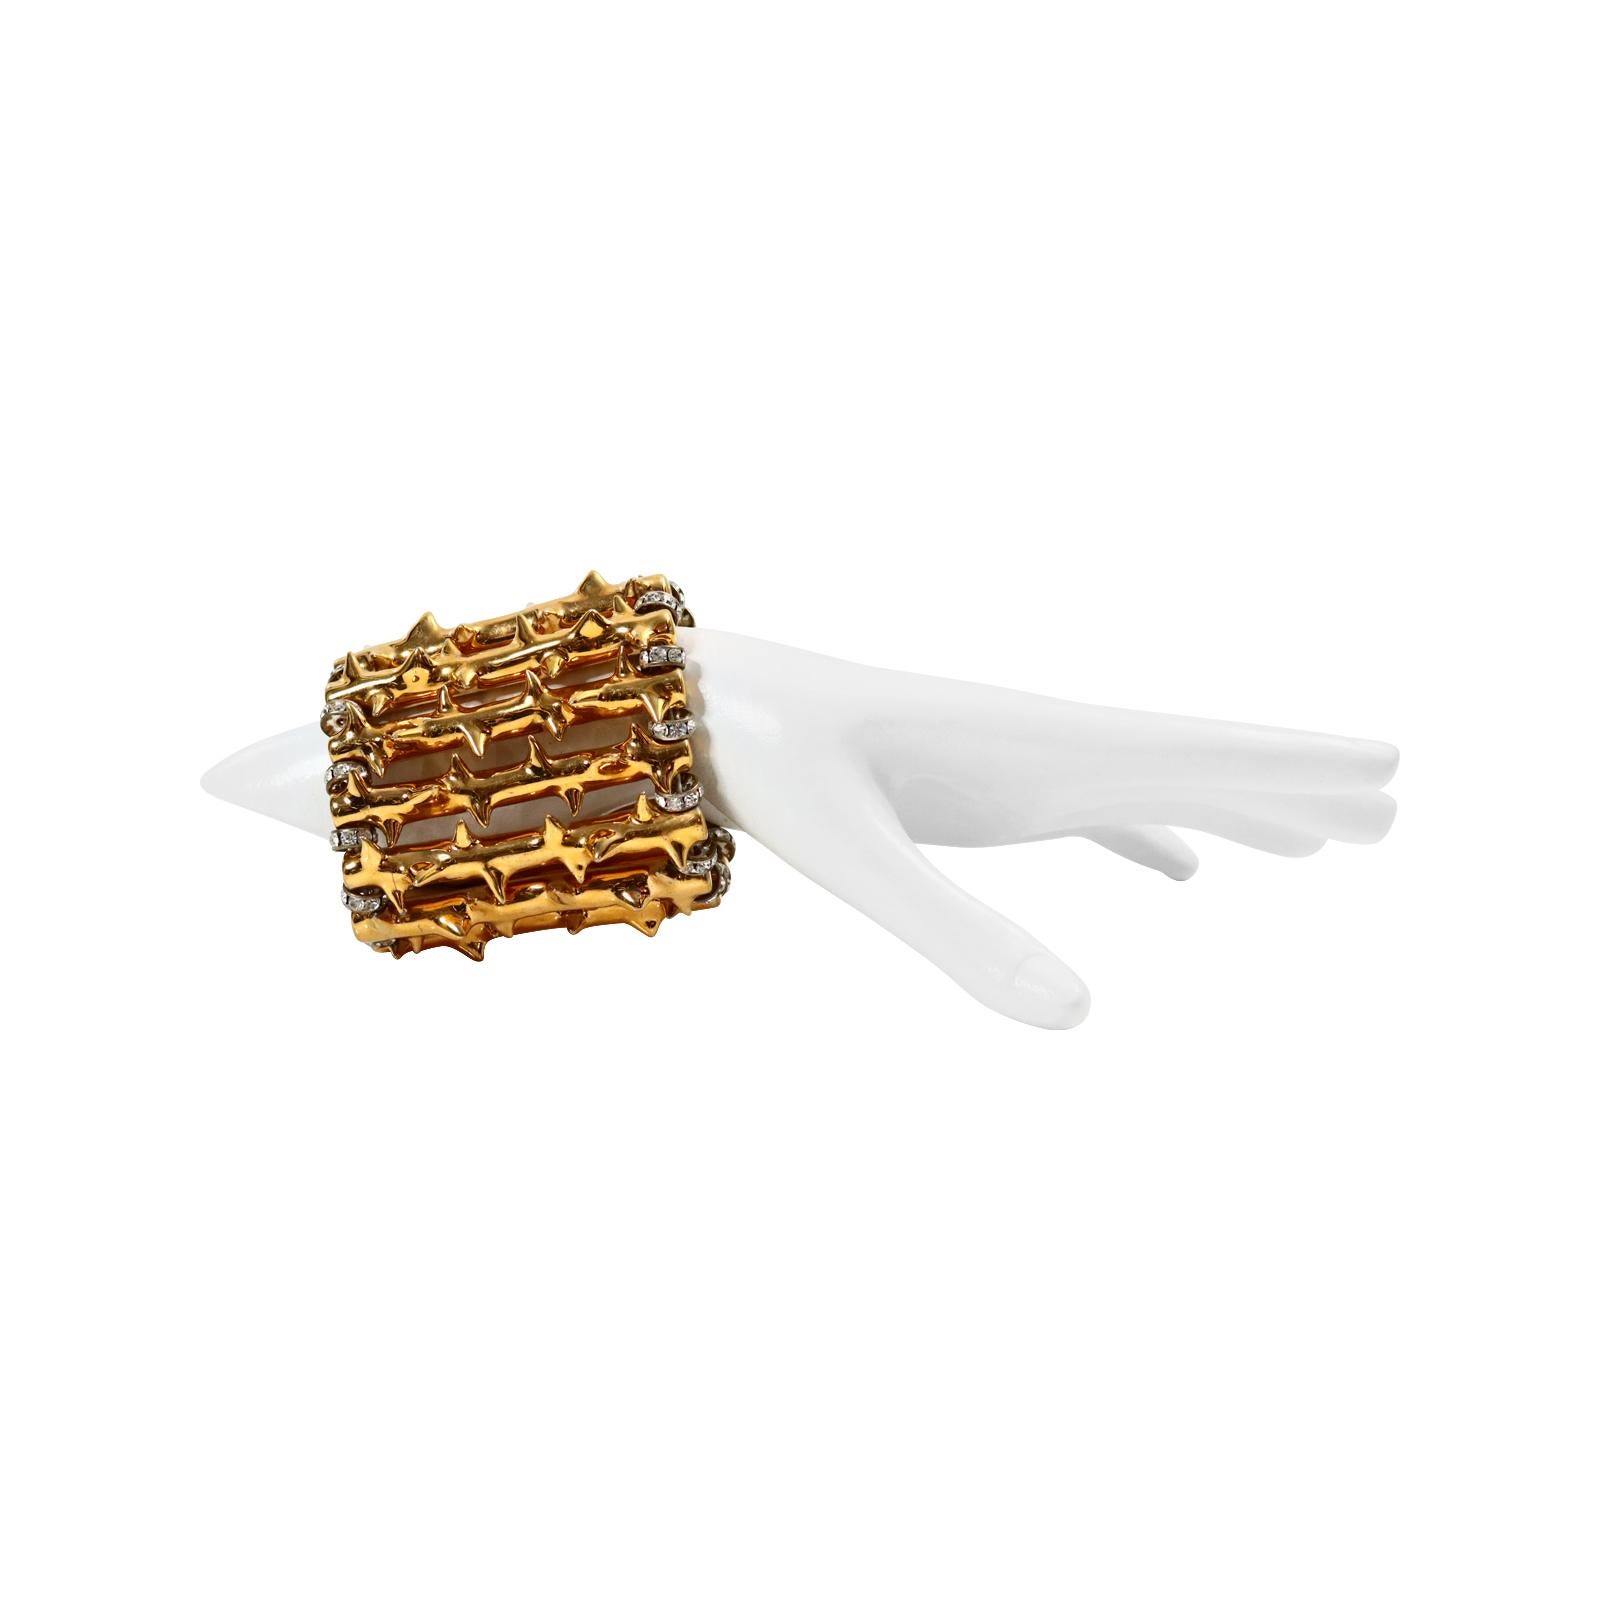 Vintage Thierry Mugler Gold Branches With Diamante Bracelet Circa 1980s.  This bracelet was created for the runway only so is a show sample and is spectacular.  It is on elastic so will fit many sizes.  They are long branches with thornes like rose